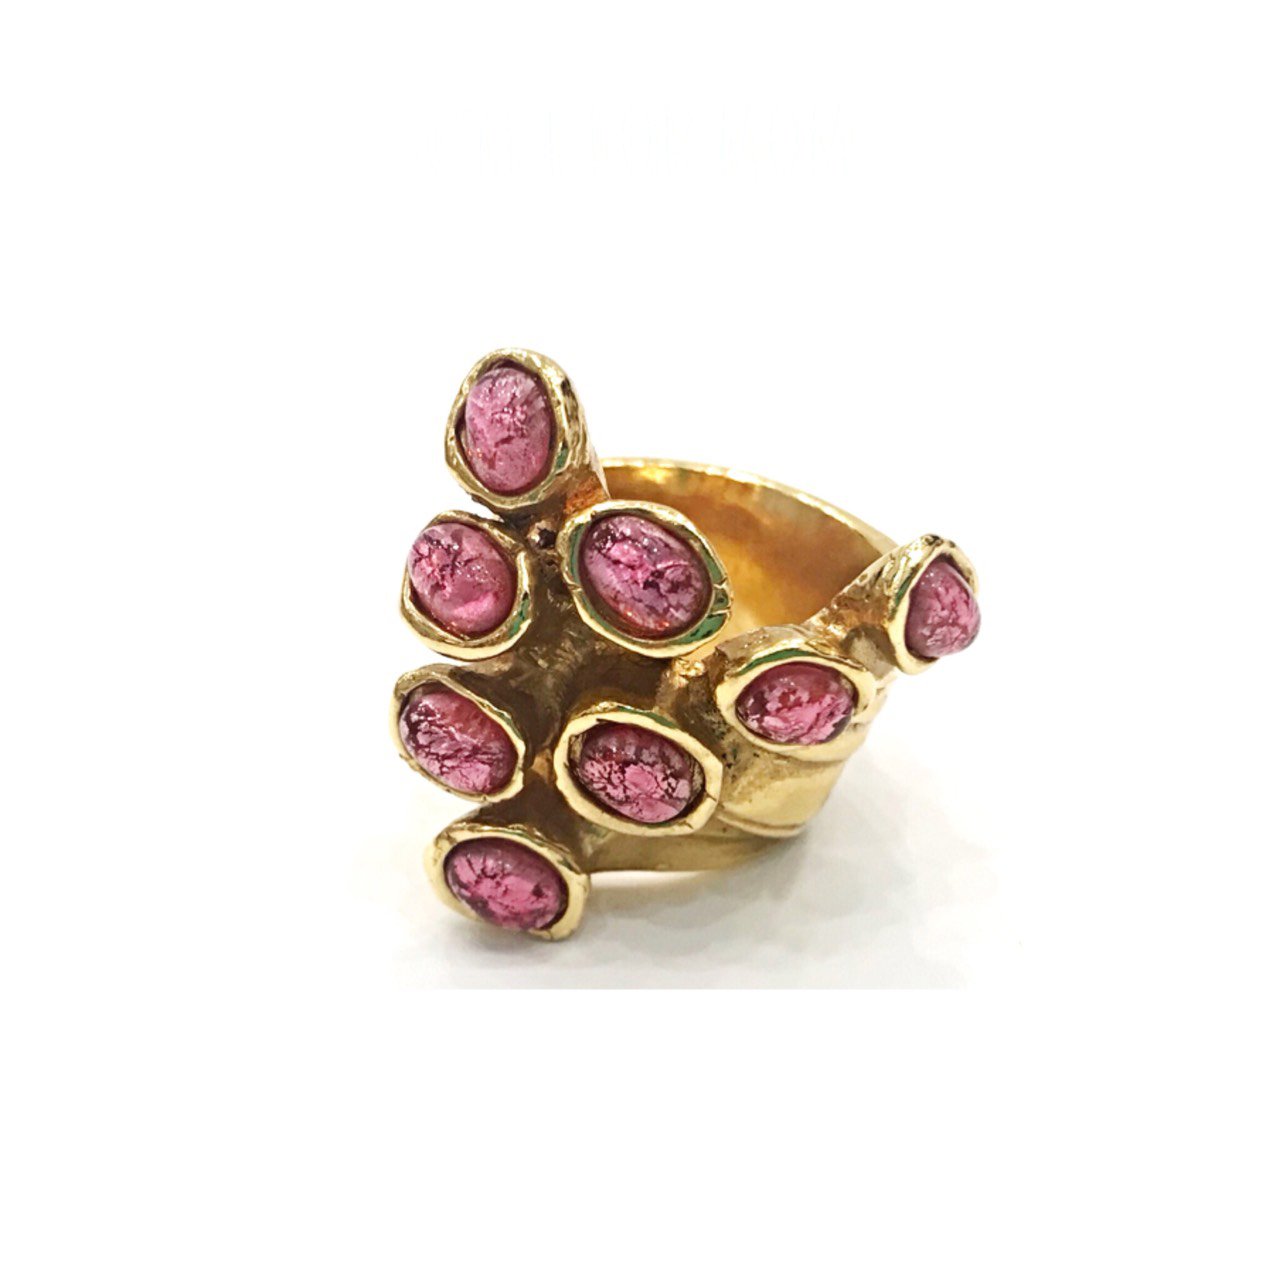 New YSL Arty Ring 7" in Pink Stone GHW